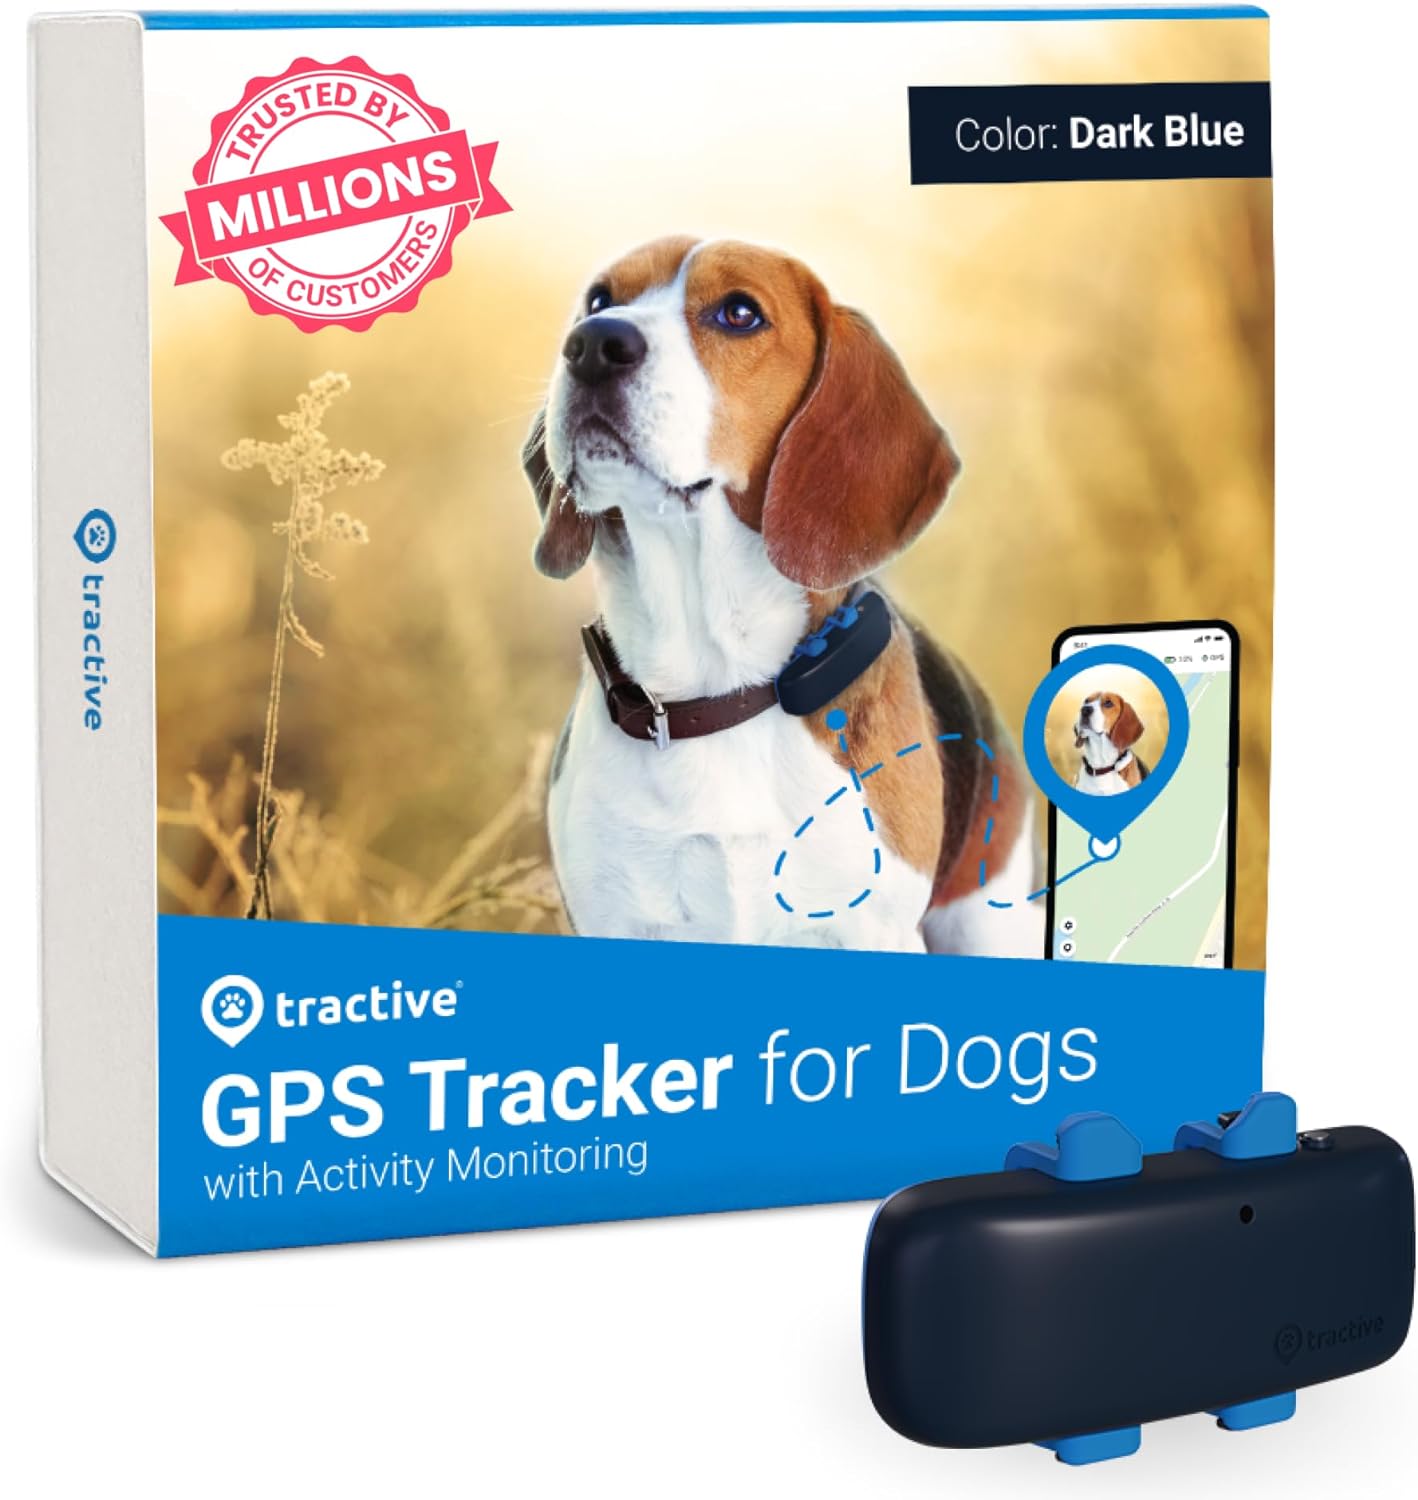 Tractive GPS Tracker Health Monitoring for Dogs - Market Leading Pet GPS Location Tracker, Wellness Escape Alerts, Waterproof, Works with Any Collar (Dark Blue)